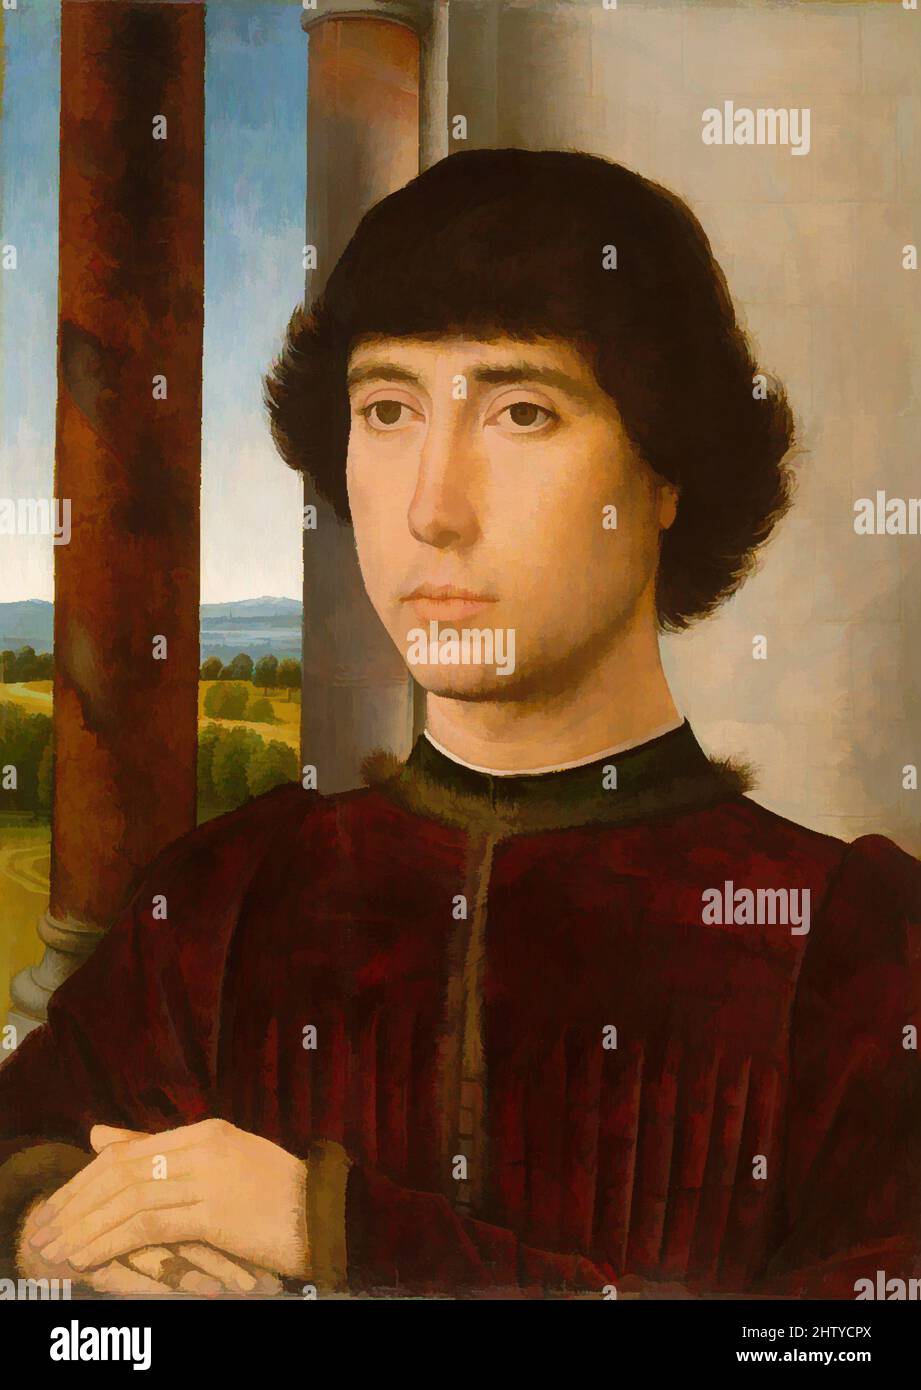 Art inspired by Portrait of a Young Man, ca. 1472–75, Oil on oak panel, Overall 15 3/4 x 11 3/8 in. (40 x 29 cm); painted surface 15 1/8 x 10 3/4 in. (38.3 x 27.3 cm), Paintings, Hans Memling (Netherlandish, Seligenstadt, active by 1465–died 1494 Bruges), One of the most sought-after, Classic works modernized by Artotop with a splash of modernity. Shapes, color and value, eye-catching visual impact on art. Emotions through freedom of artworks in a contemporary way. A timeless message pursuing a wildly creative new direction. Artists turning to the digital medium and creating the Artotop NFT Stock Photo